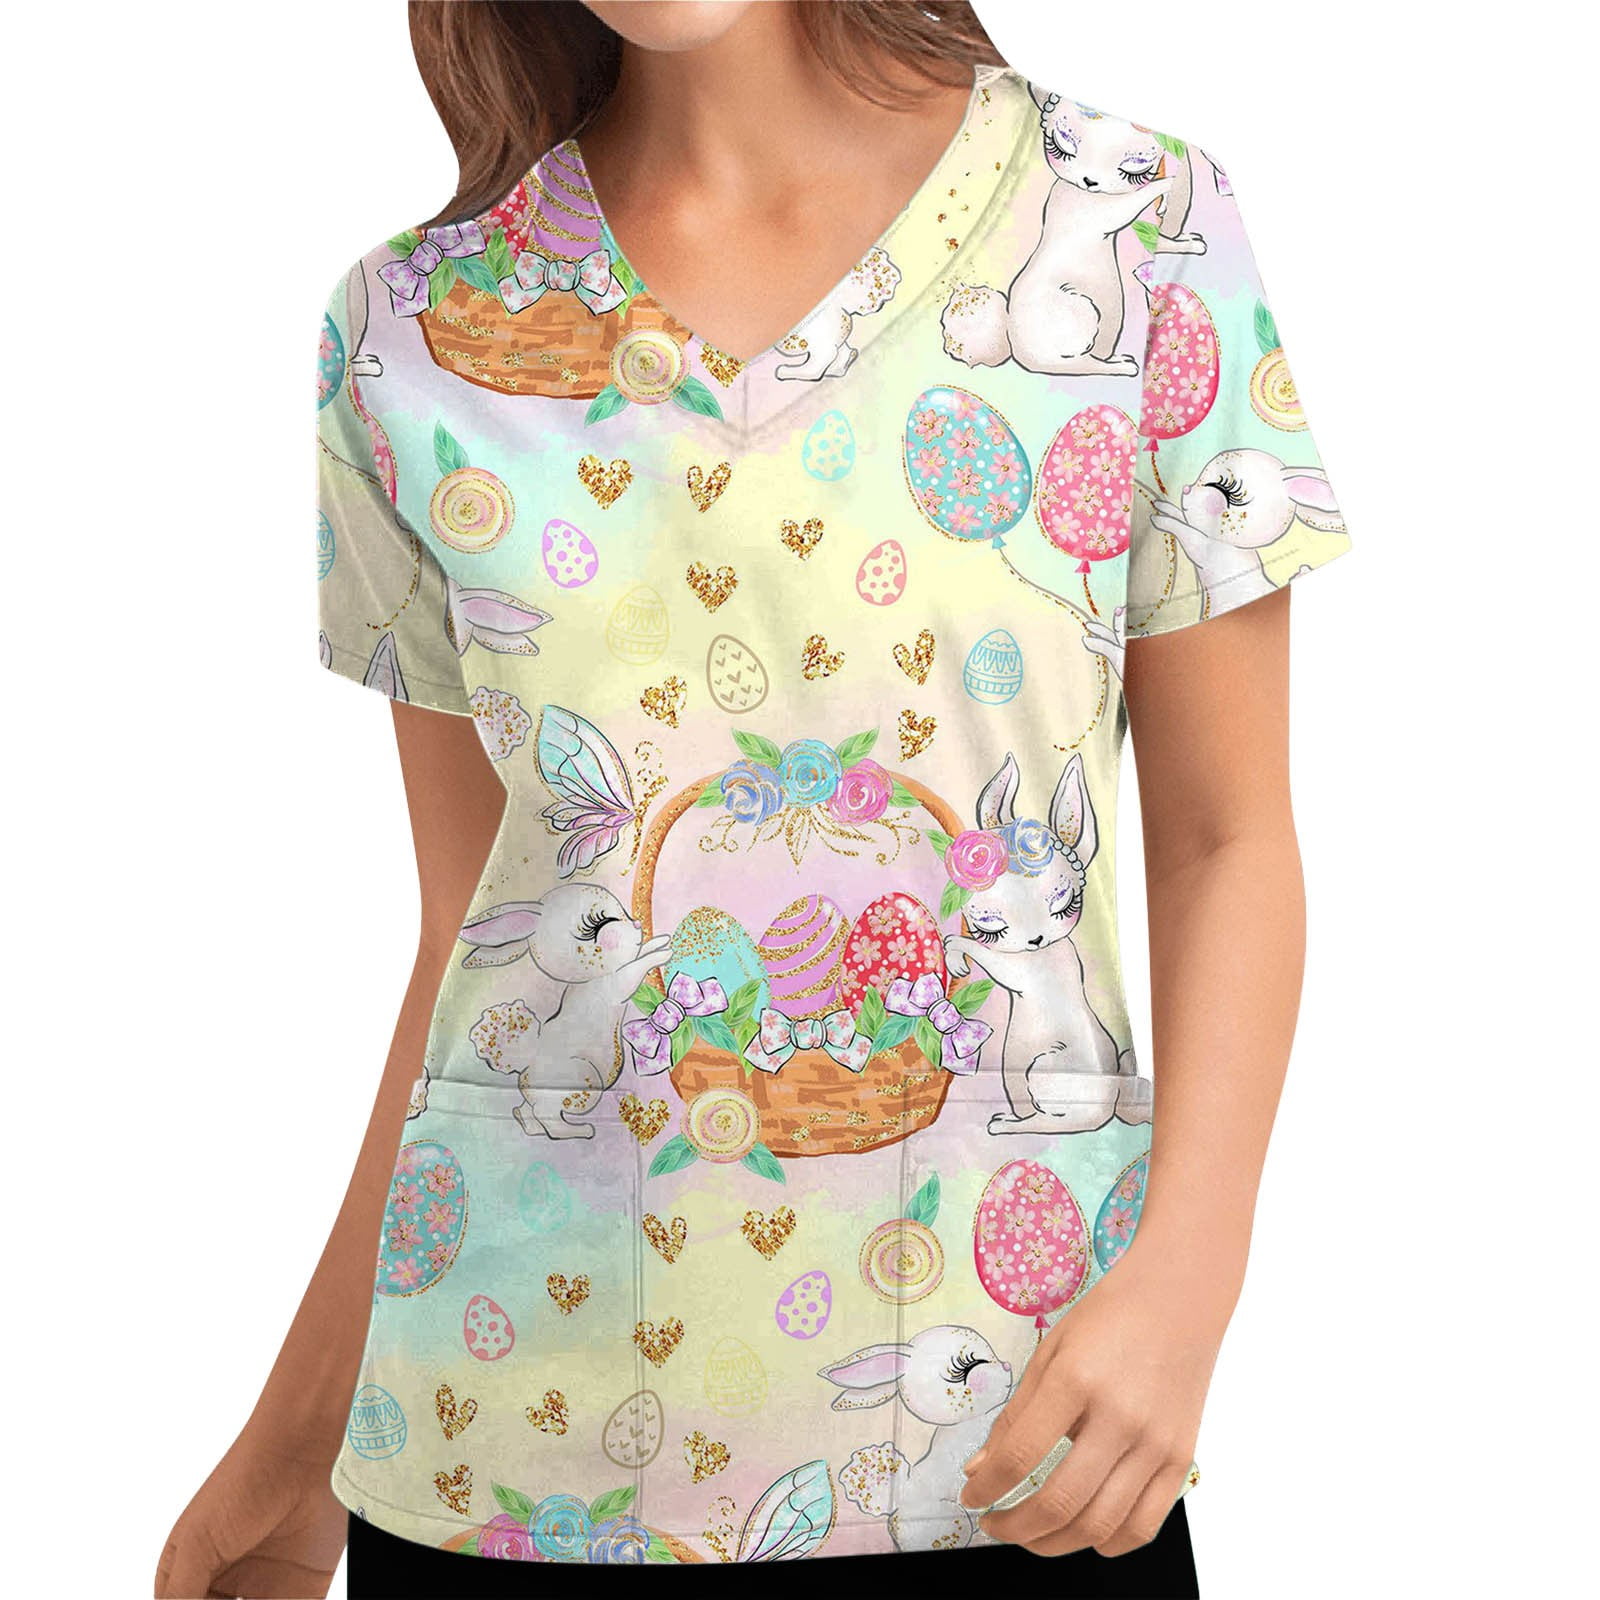 Meichang V Neck Working Uniform for Women 3D Butterfly Printed Nurse Top Short Sleeve Double Pockets Blouse